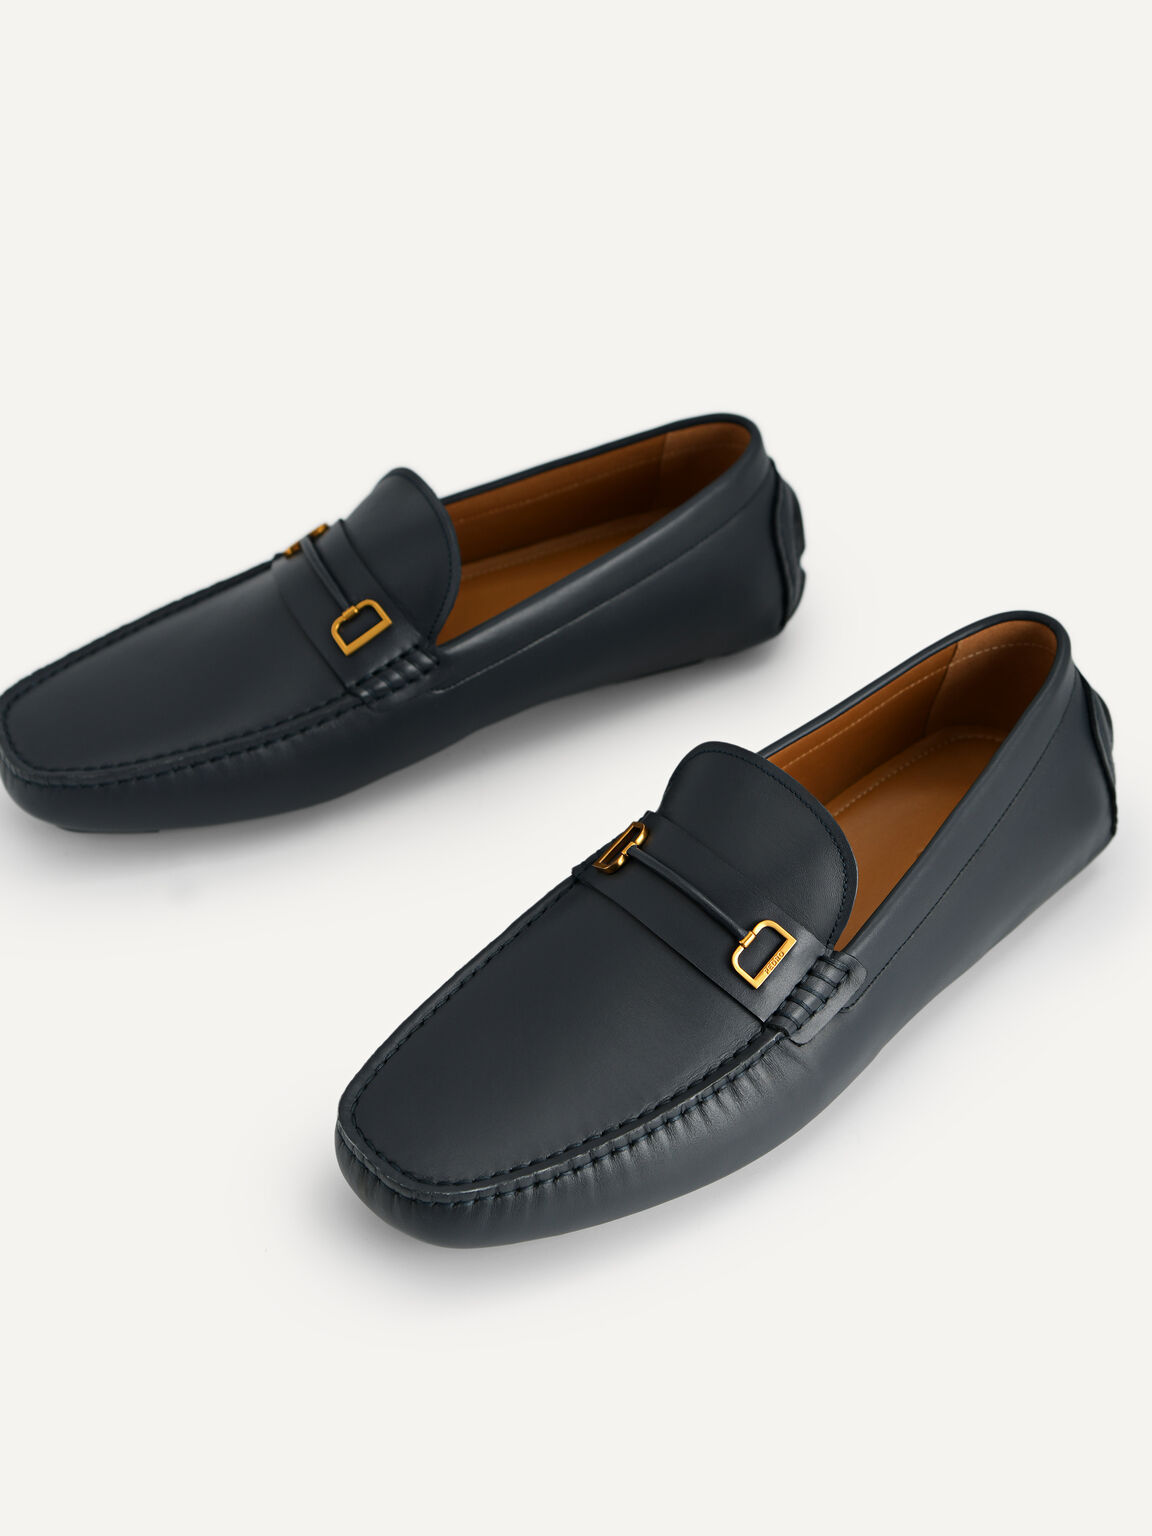 Leather Moccasins with Metal Bit, Navy